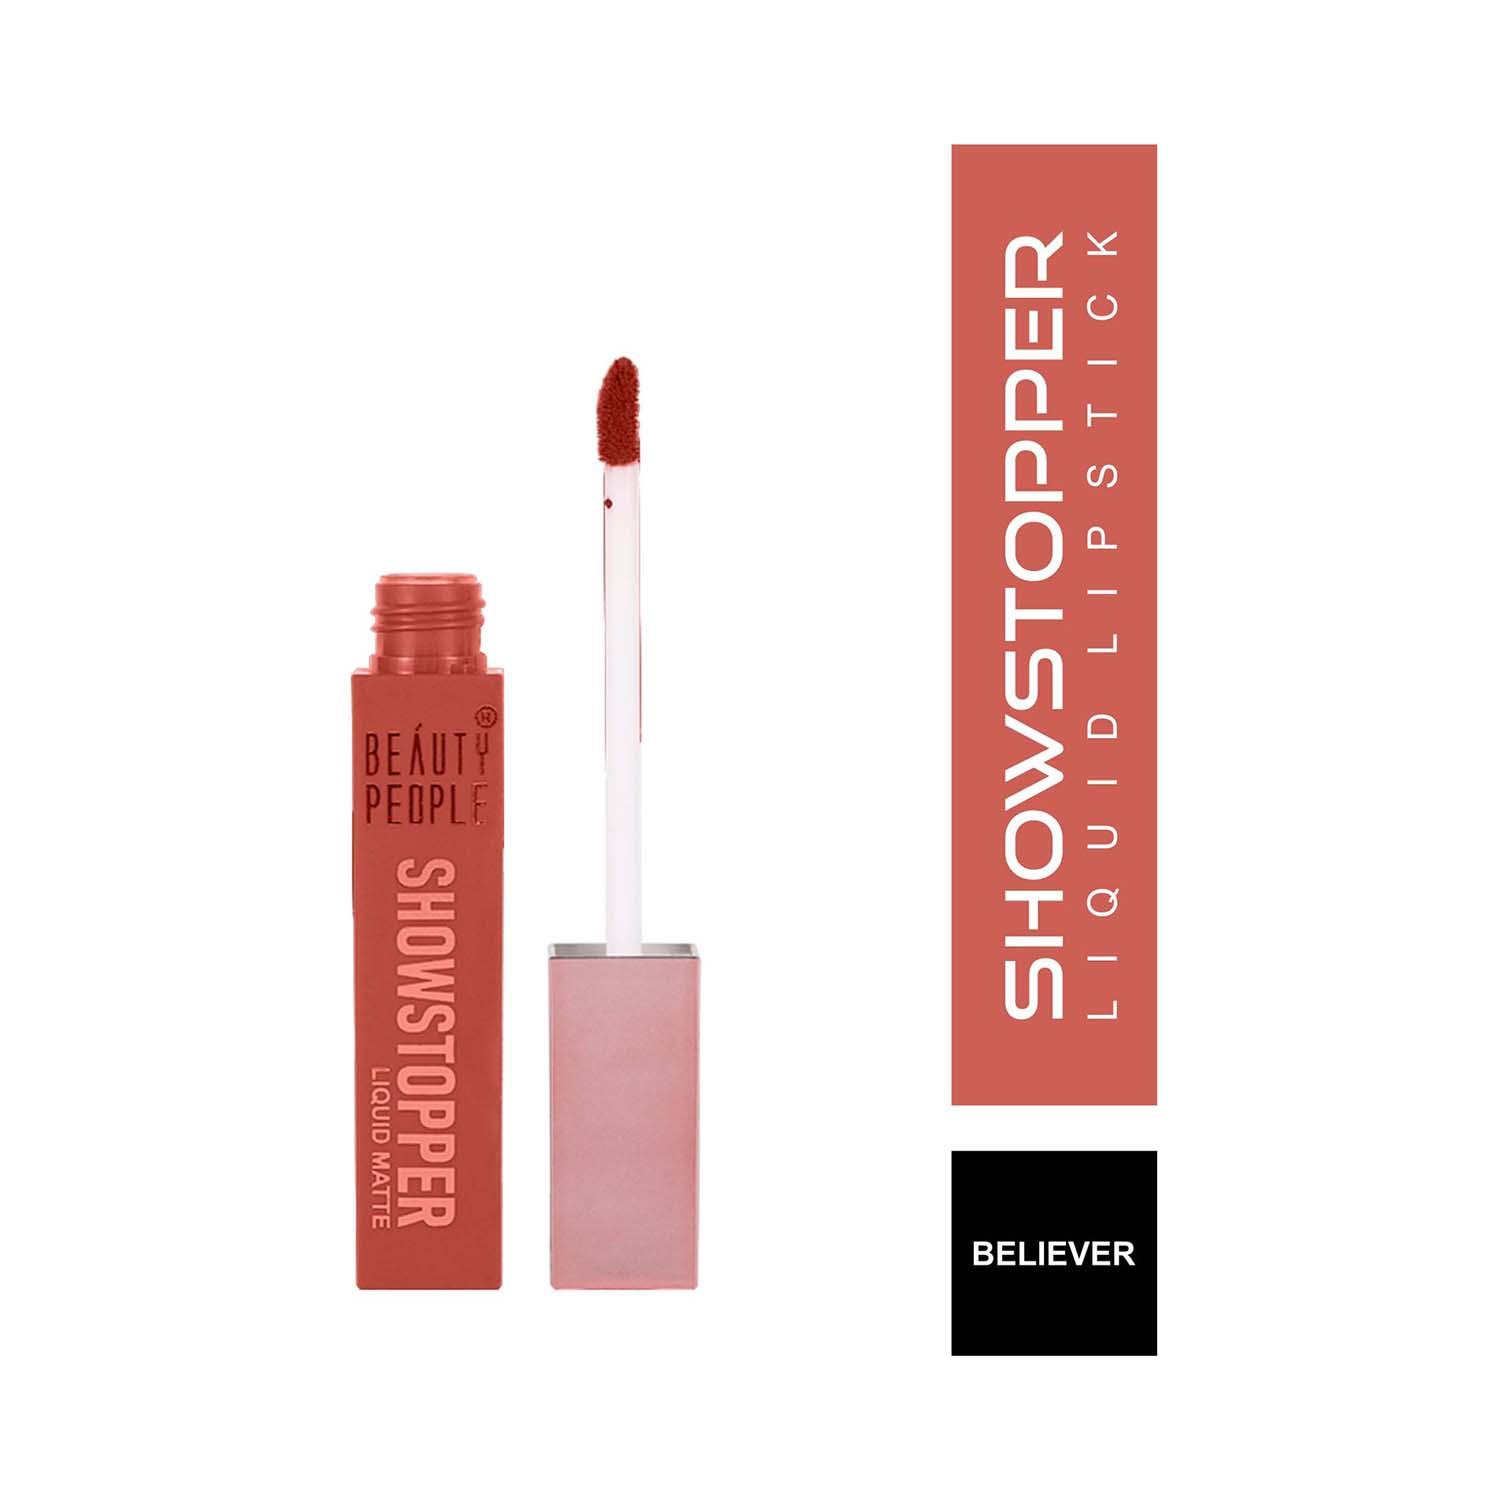 Beauty People | Beauty People Showstopper Liquid Lip Color with SPF 15 & Vitamin E - 08 Believer (4ml)